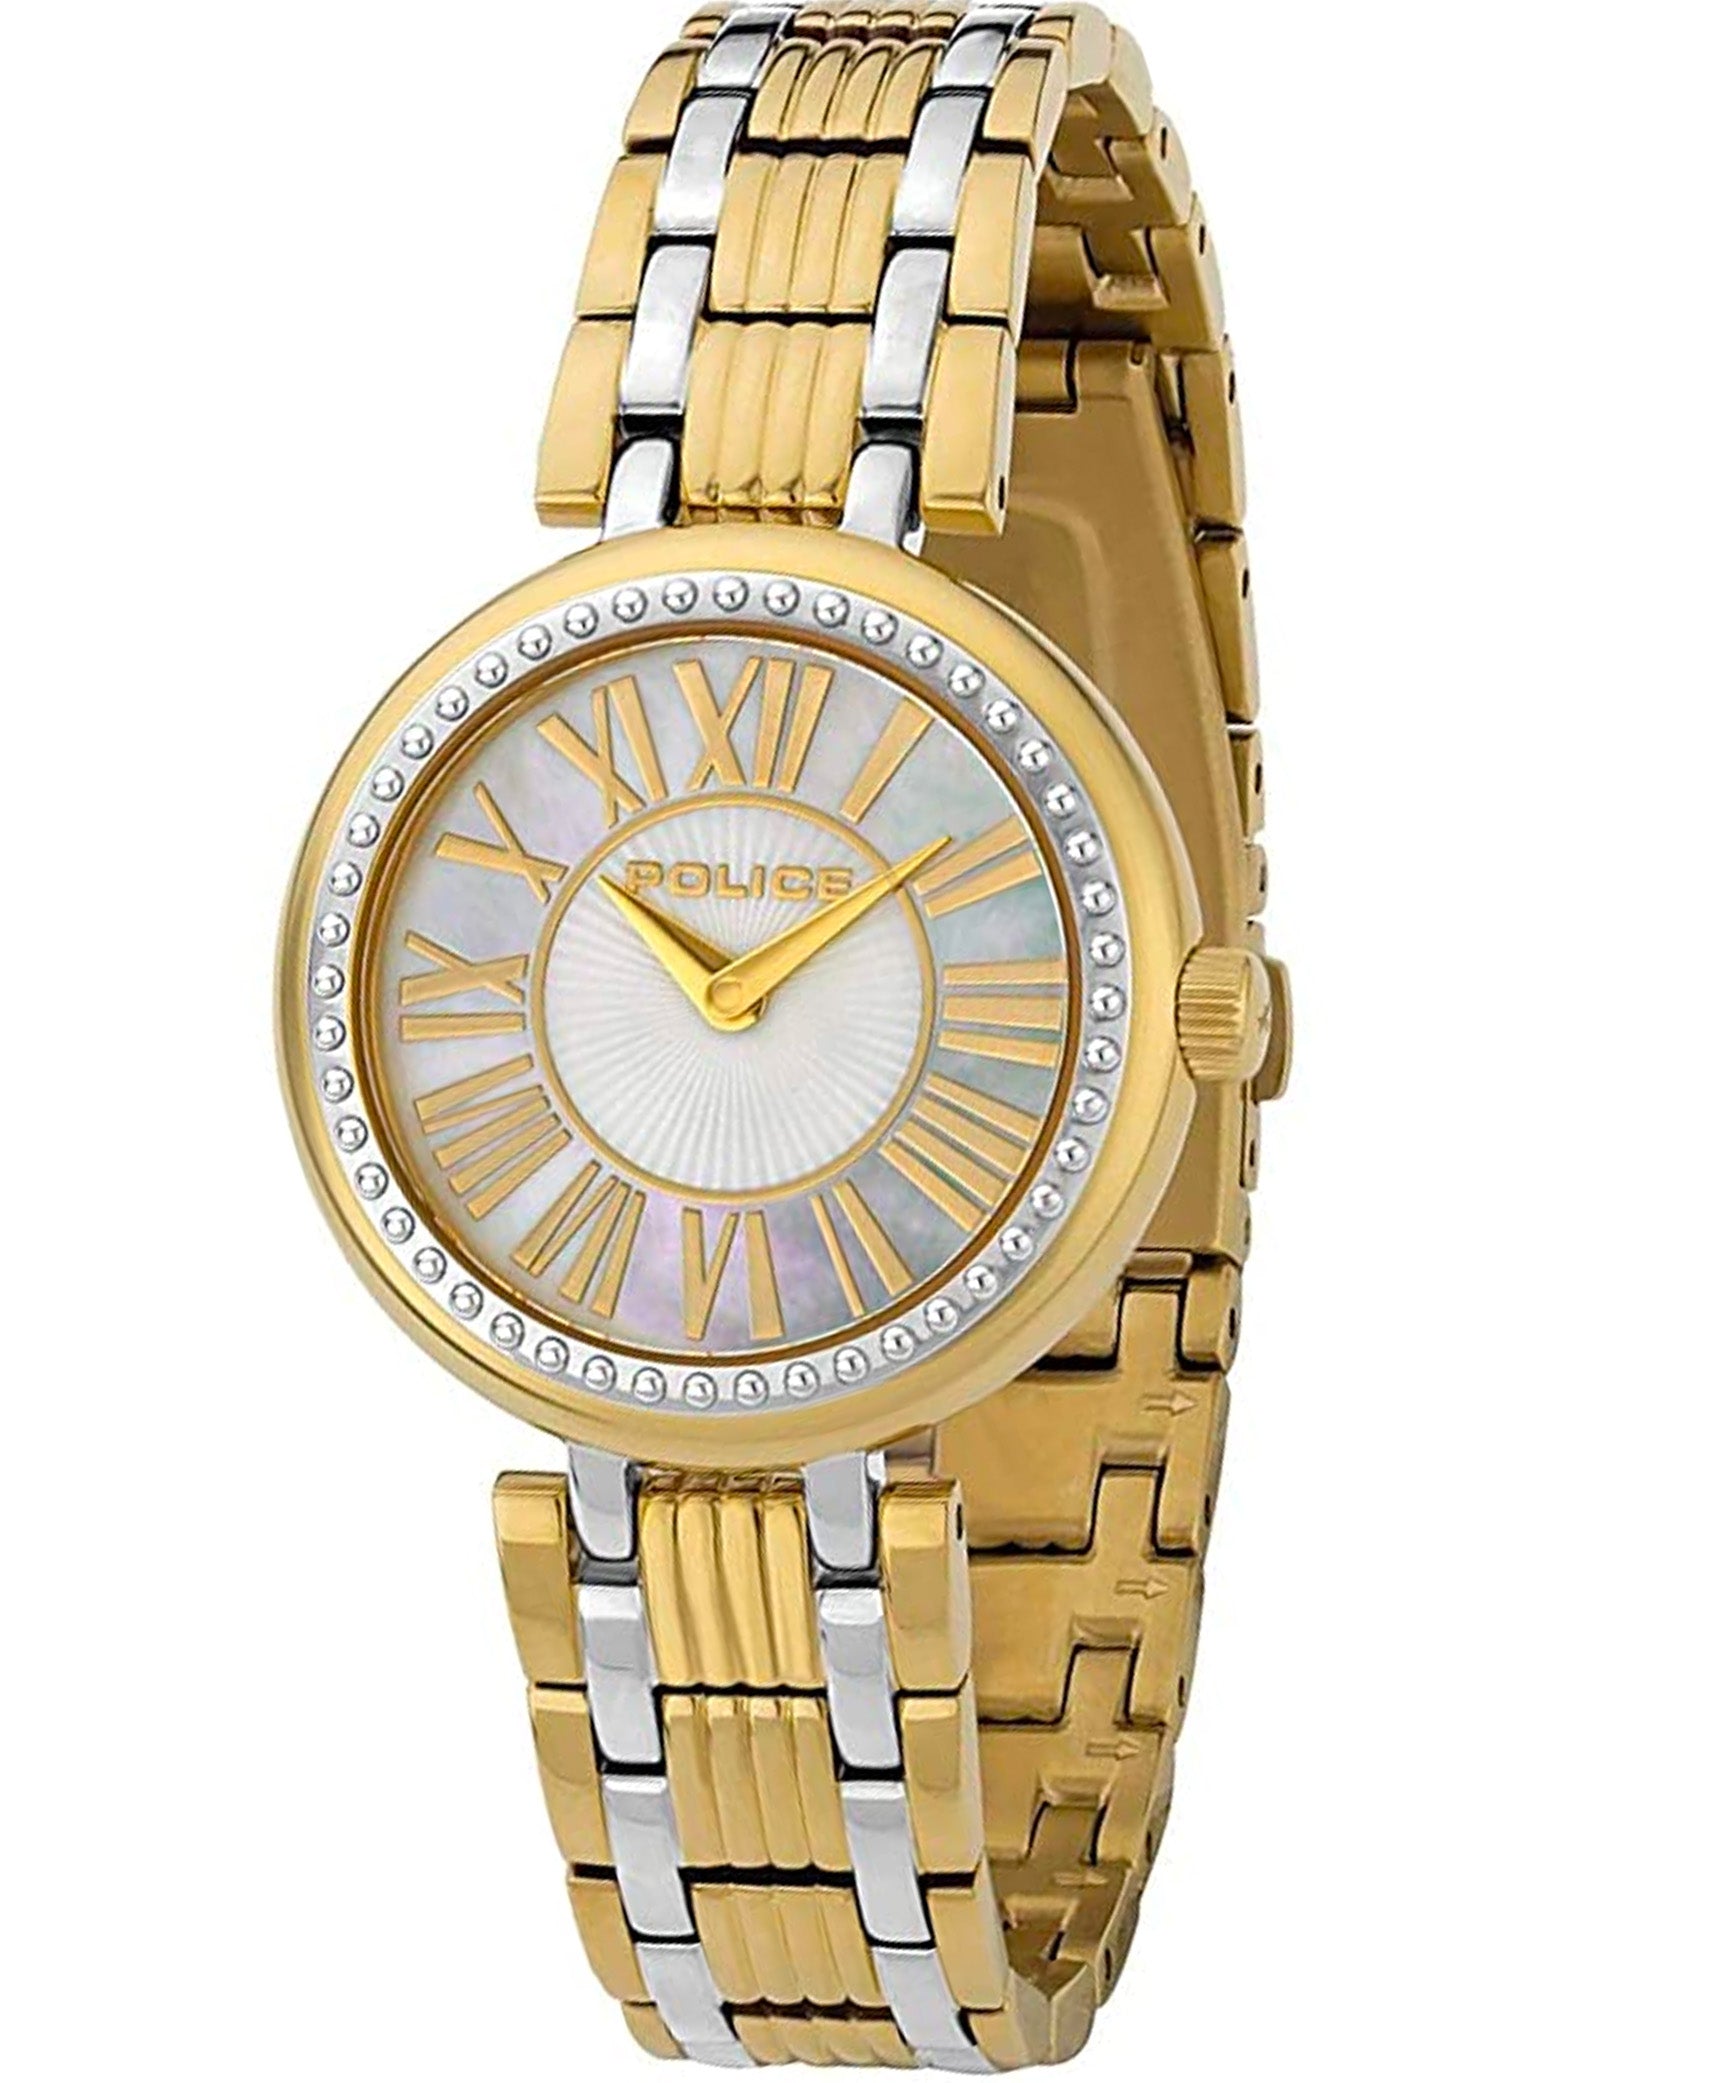 Police Women's Watch Analog, Silver Dial Silver & Gold Stainless Band, P14987BSTG-D